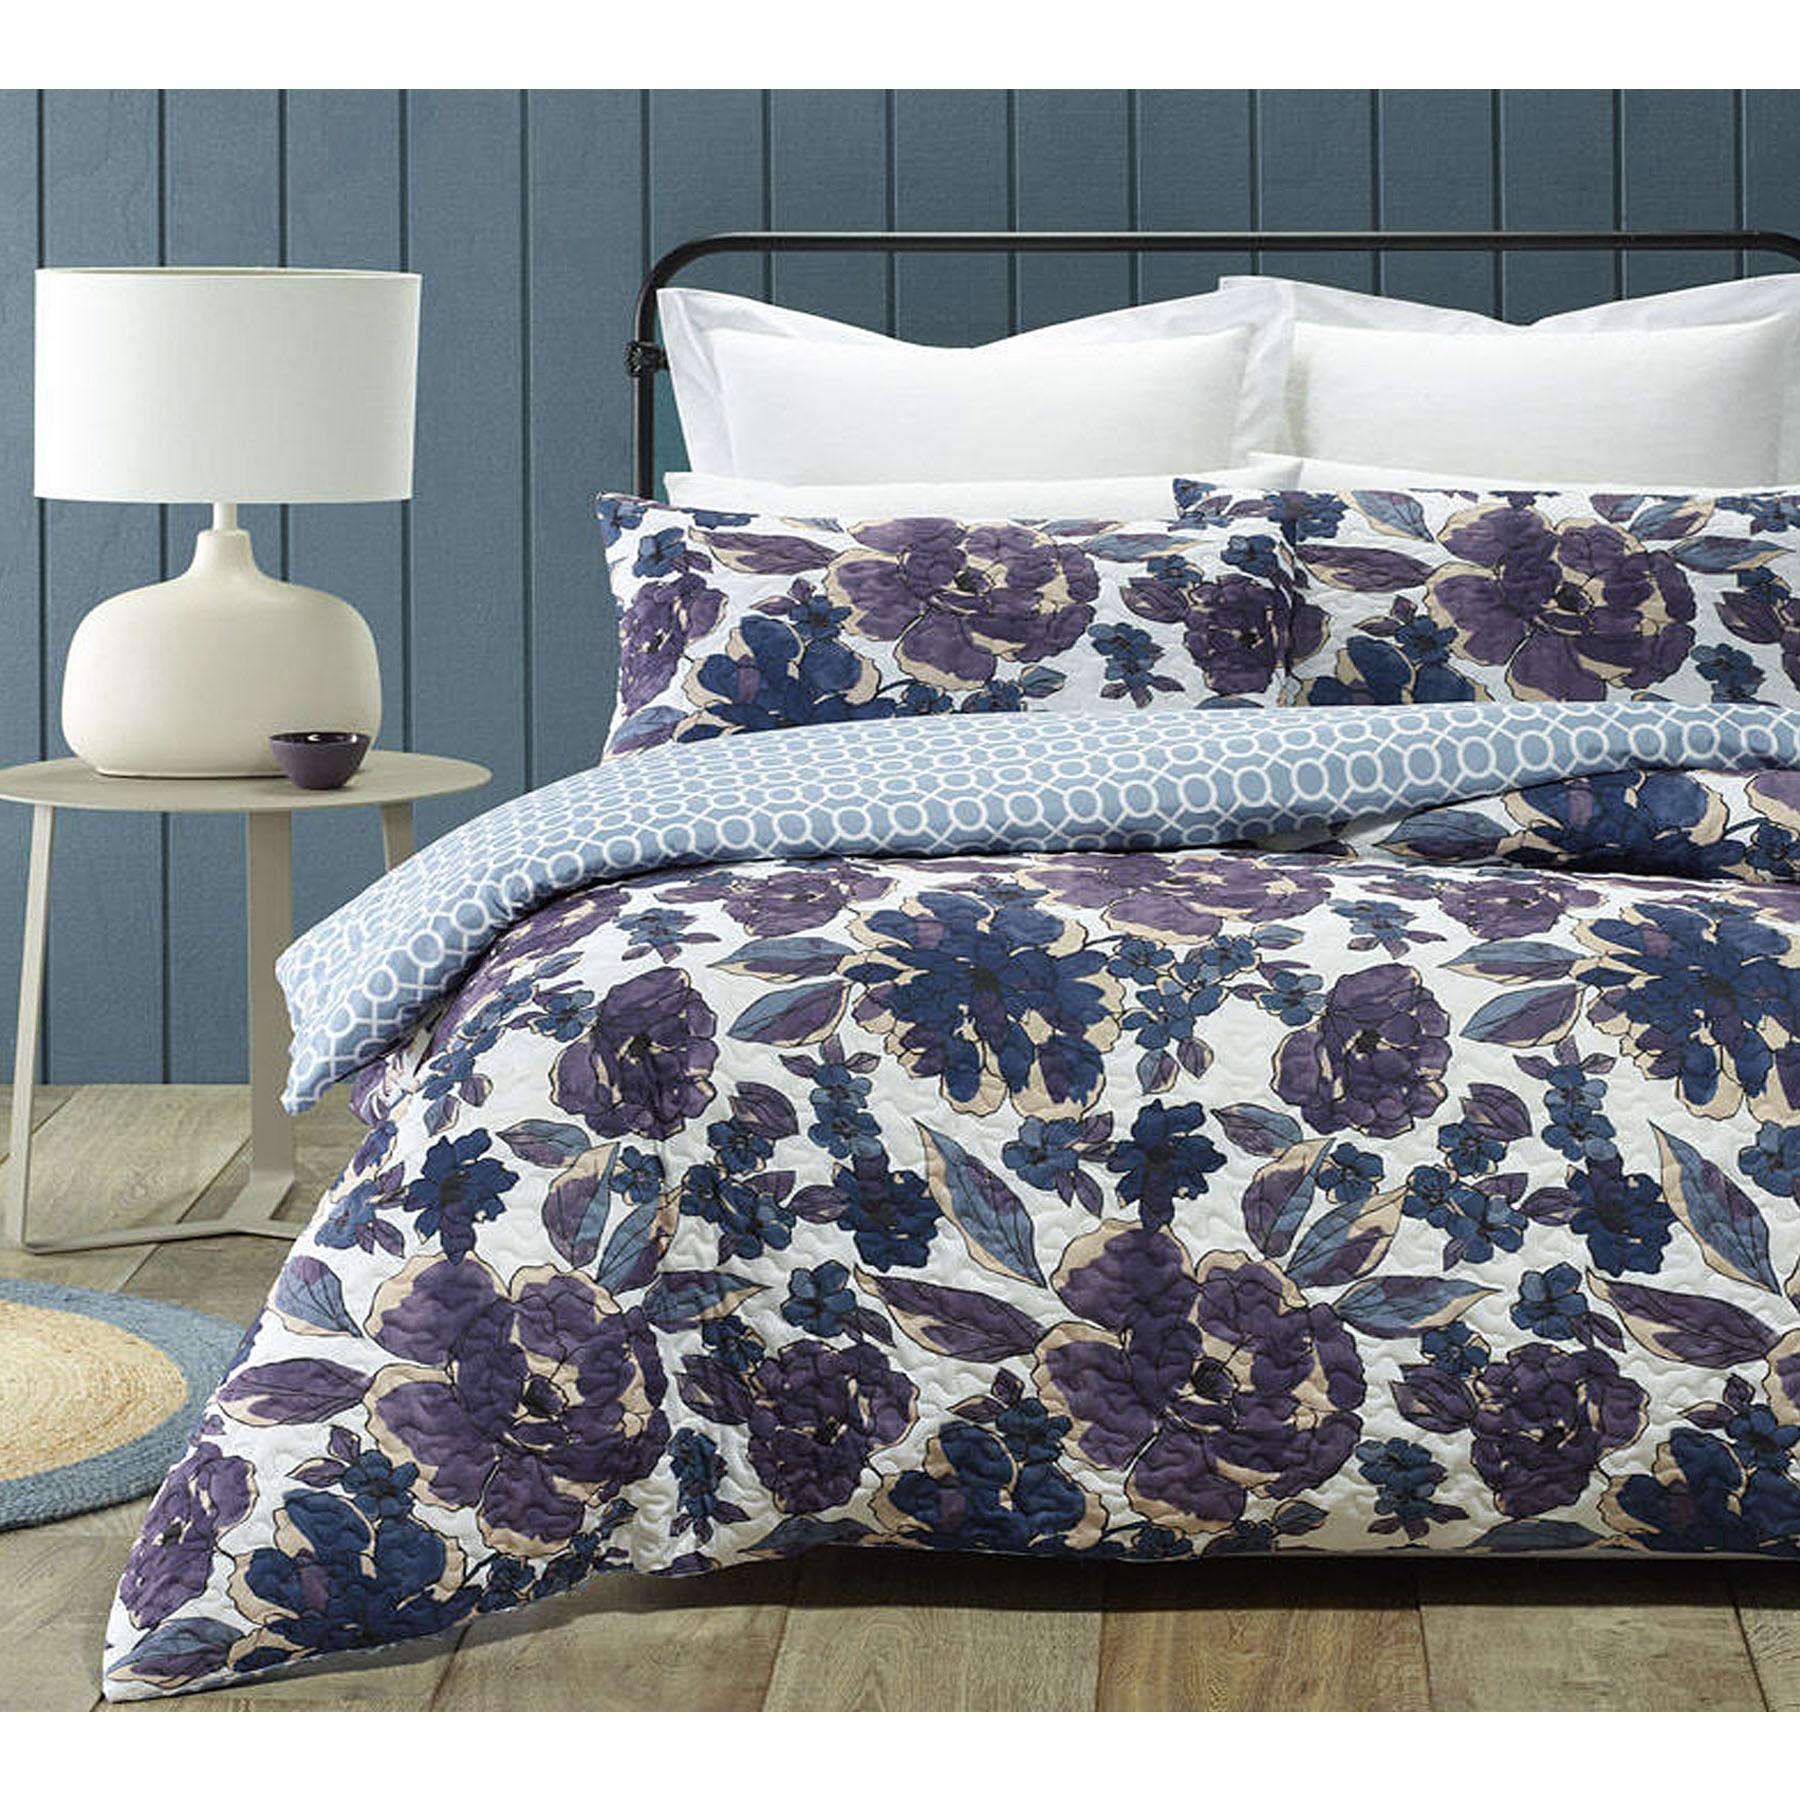 Phase 2 Monterey Quilt Cover Set DOUBLE